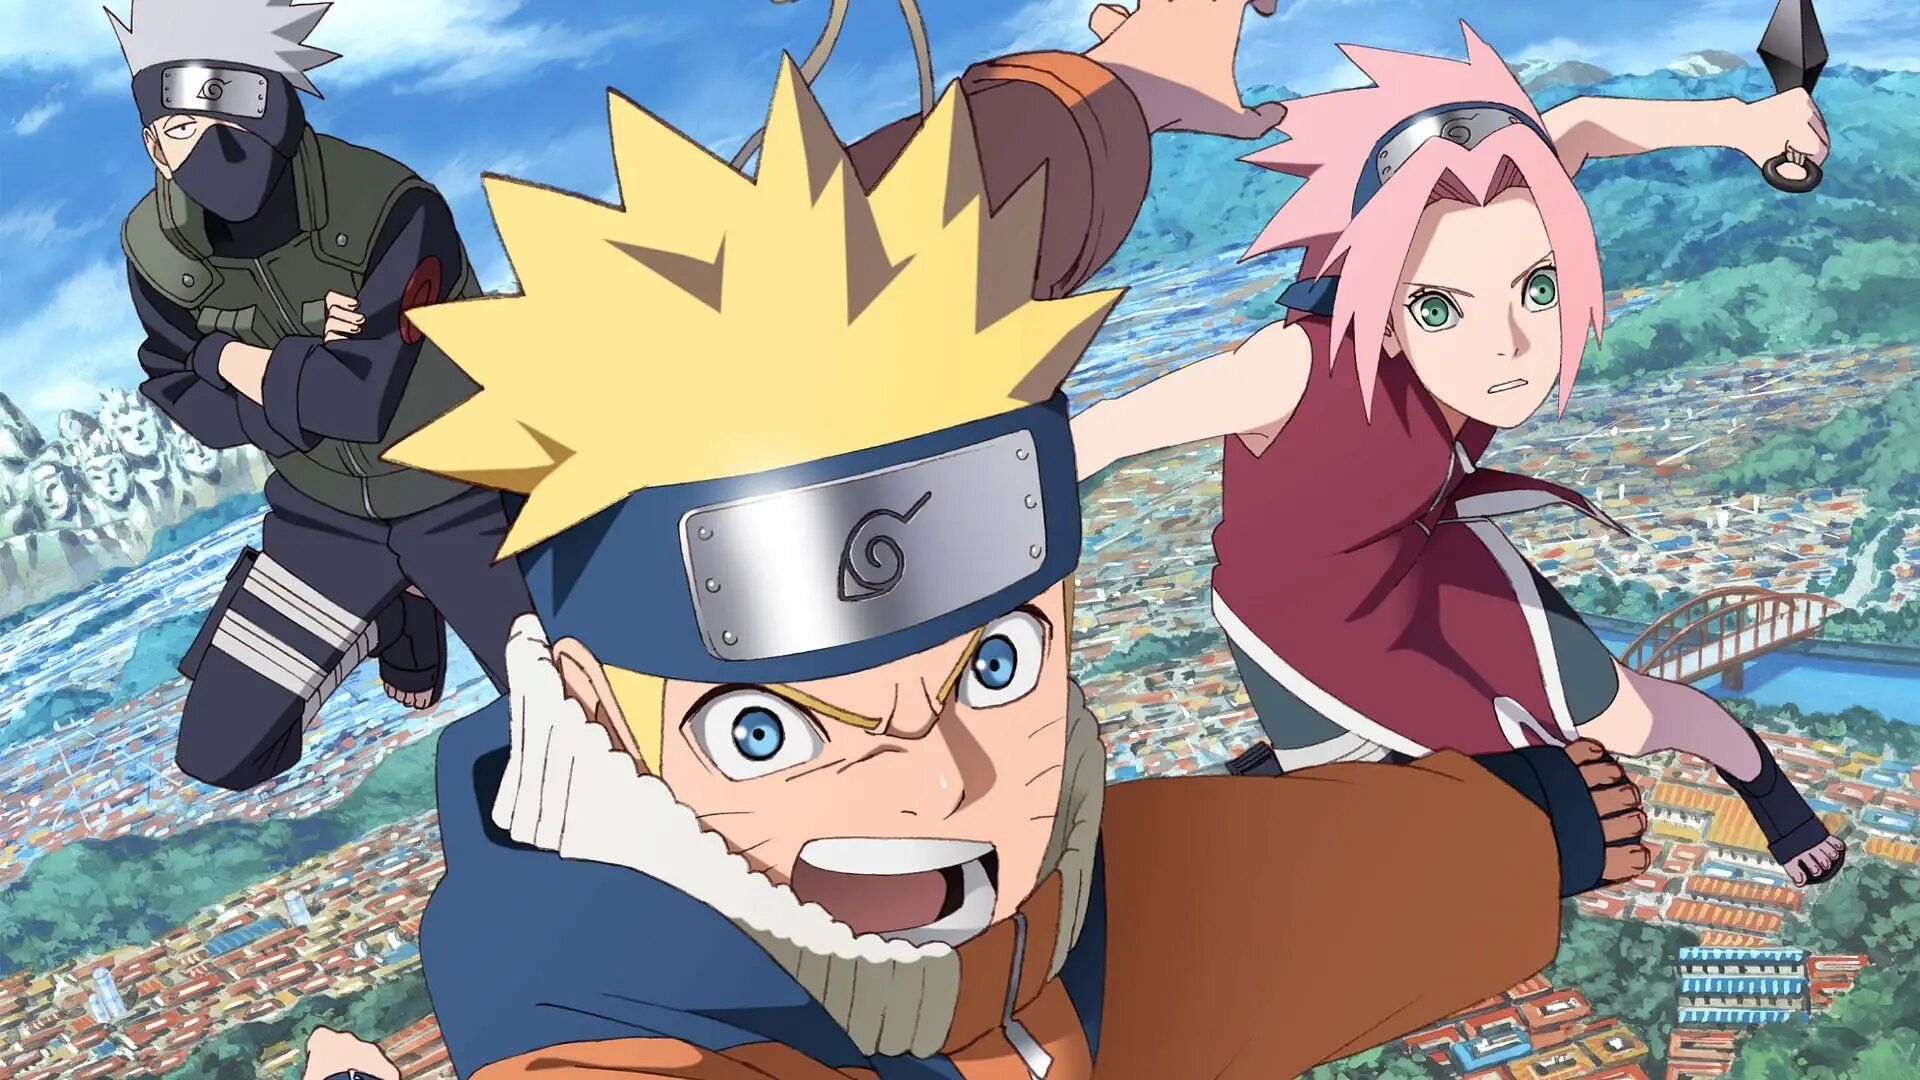 Naruto characters people want to see in the new anime (Image via Studio Pierrot).